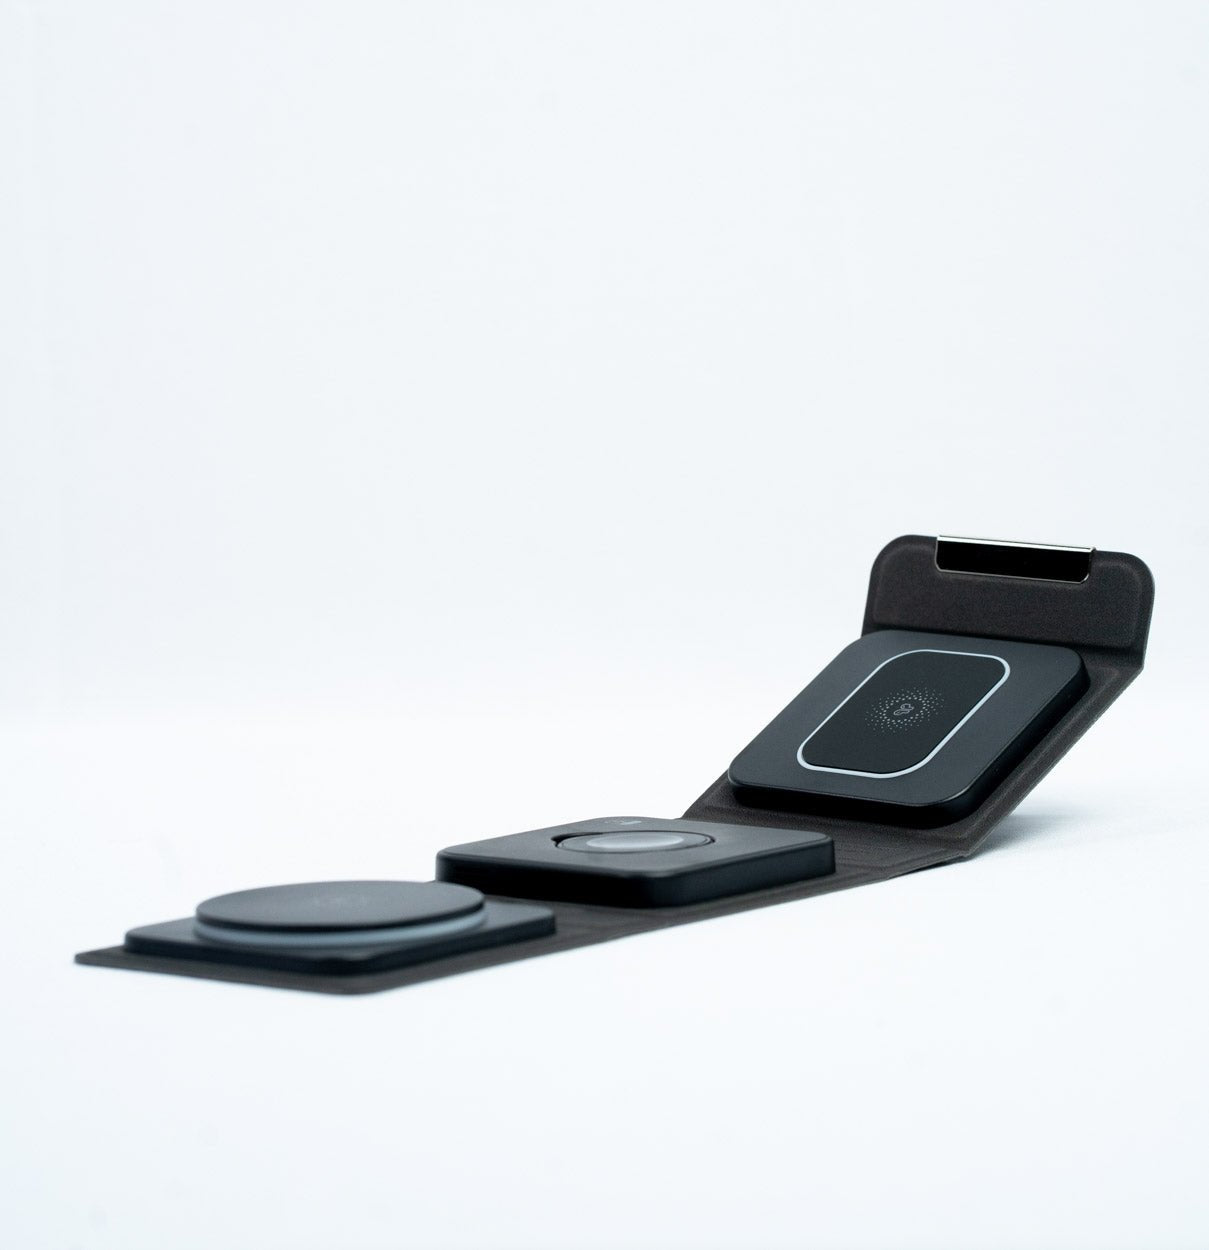 Cubica 3-in-1 Wireless Charging Station in Compact Design